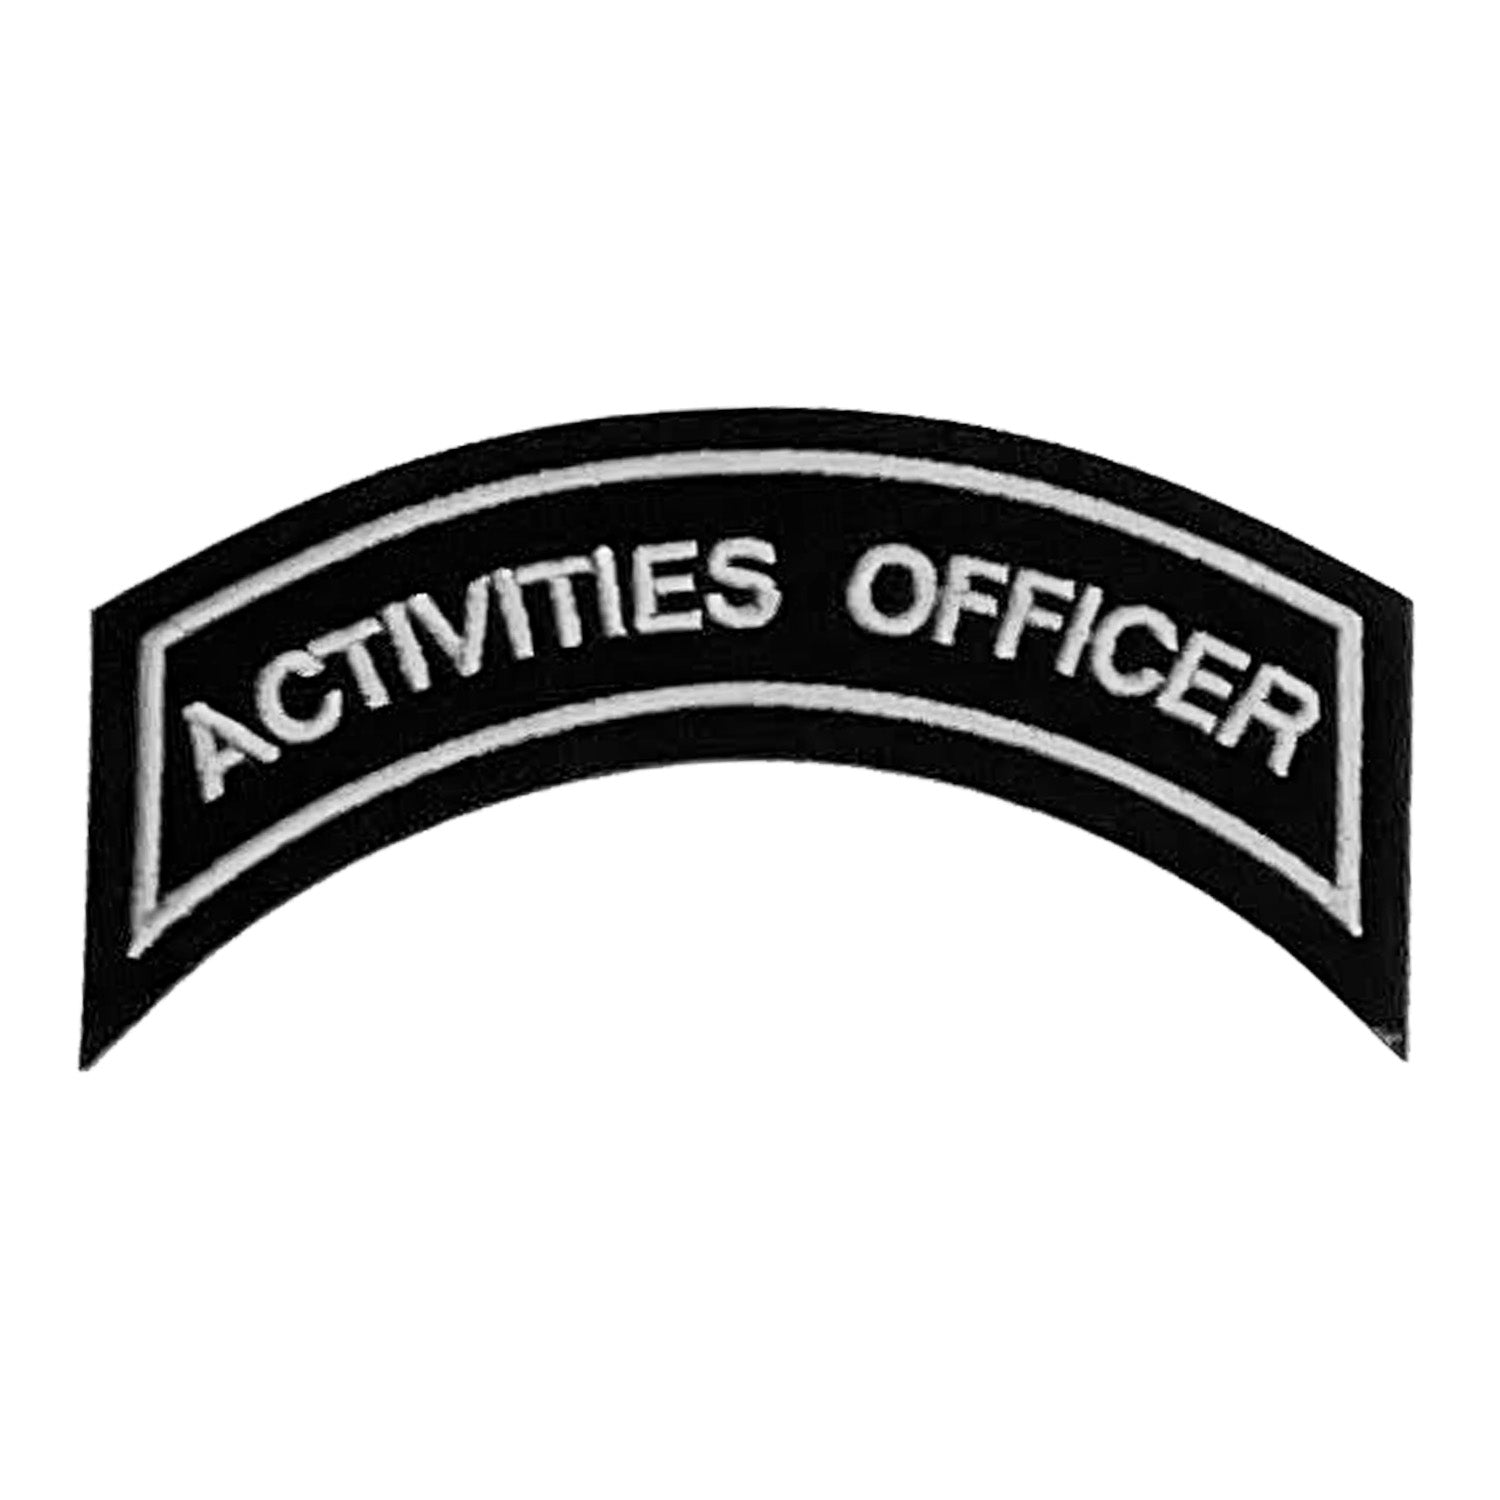 ACTIVITIES OFFICER Patch In Silver